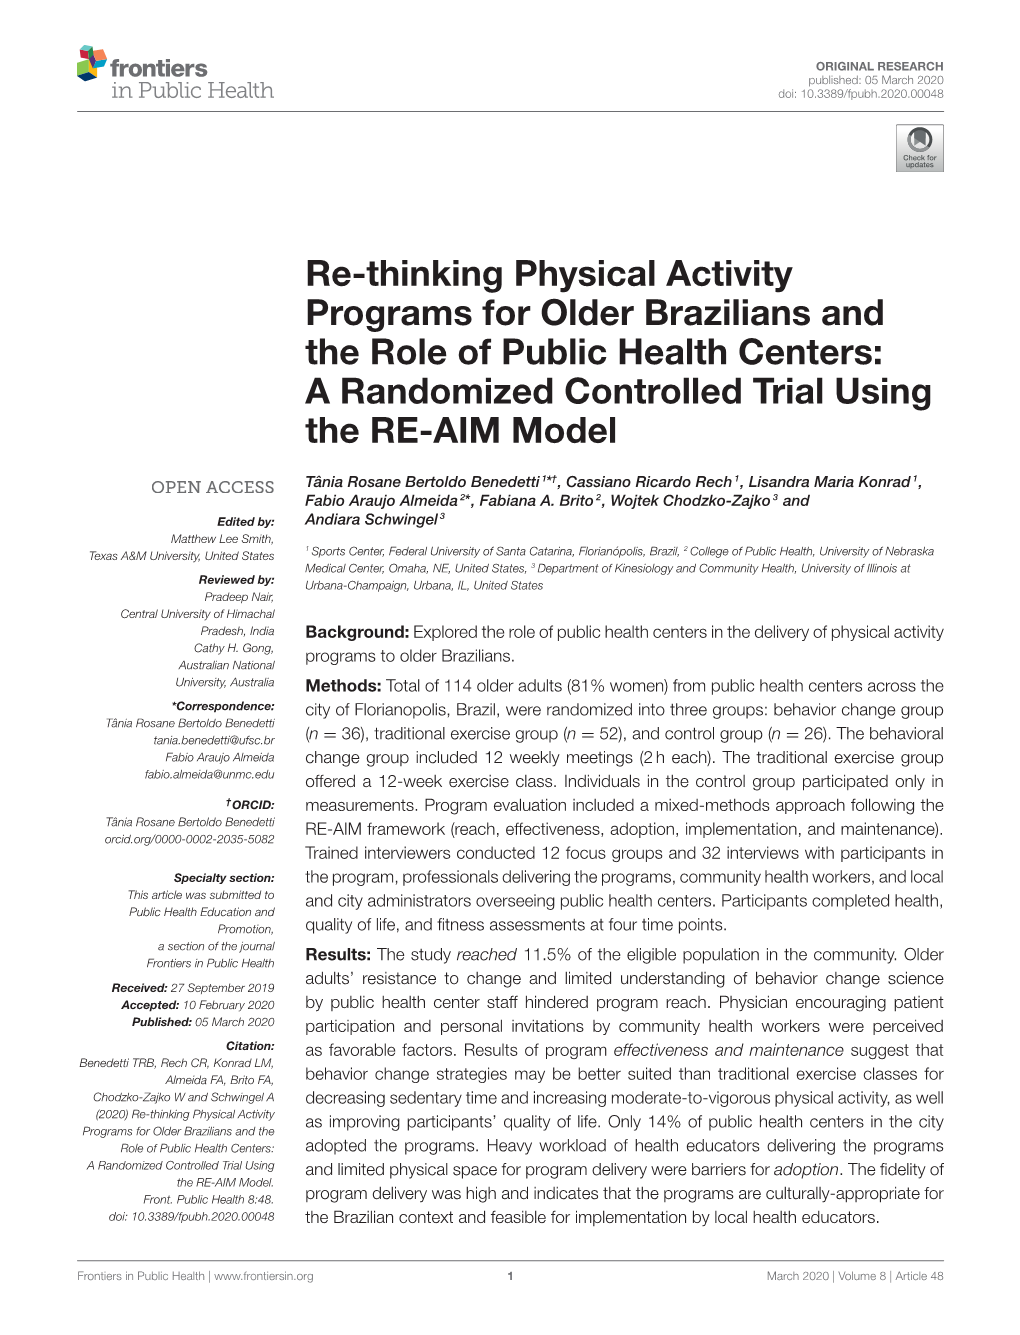 Re-Thinking Physical Activity Programs for Older Brazilians and the Role of Public Health Centers: a Randomized Controlled Trial Using the RE-AIM Model